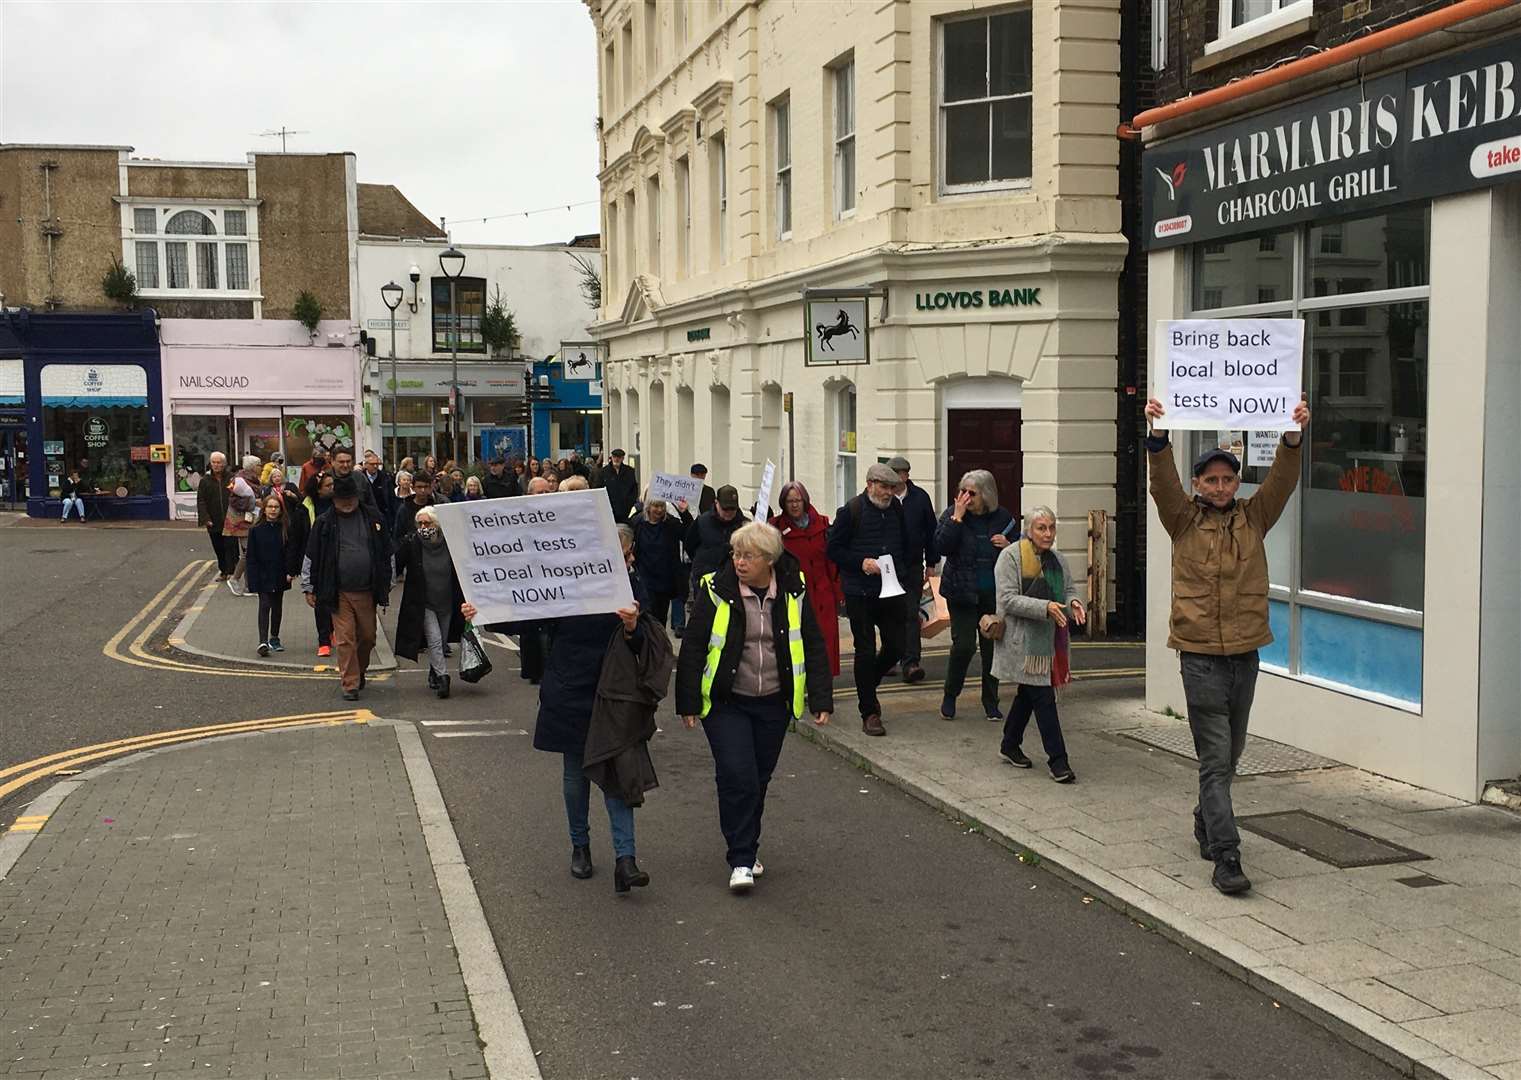 Protesters met at Deal Pier on last November to campaign against the closure of blood tests at Deal hospital. Photo: Tony Grist